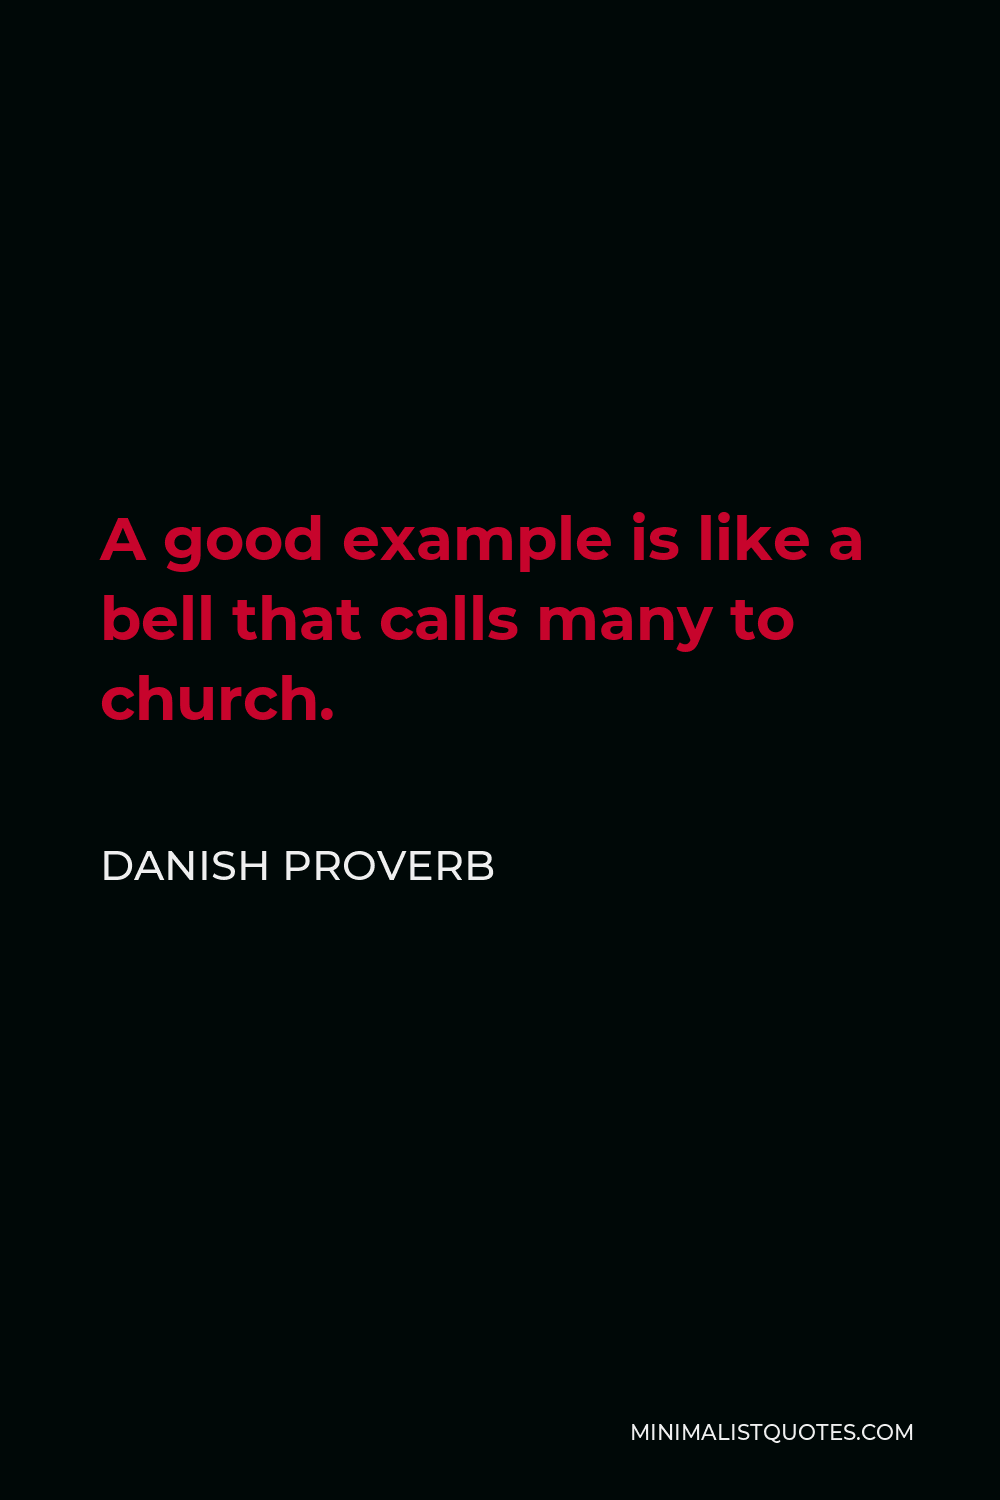 Danish Proverb Quote - A good example is like a bell that calls many to church.